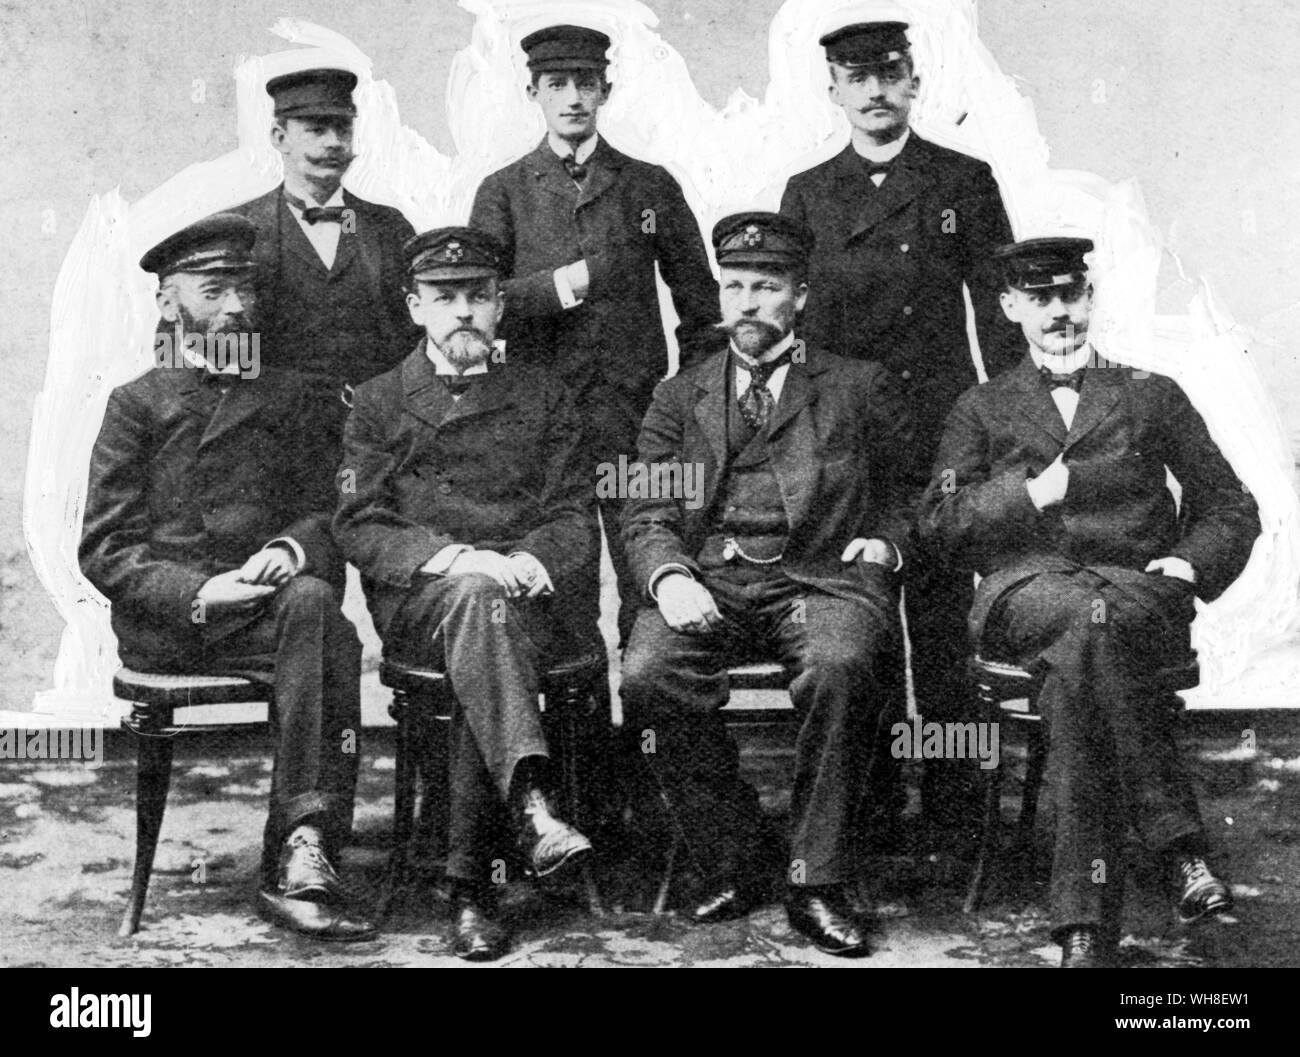 Members of the Swedish South Polar Expedition on their departure from Gottenberg. Standing left to right Bodman, Skottsberg, K A Andersson. Sitting left to right: Ohlin, Nordenskjold, Larsen and Ekelof 1905. From Antarctica: The Last Continent by Ian Cameron page 147. Stock Photo